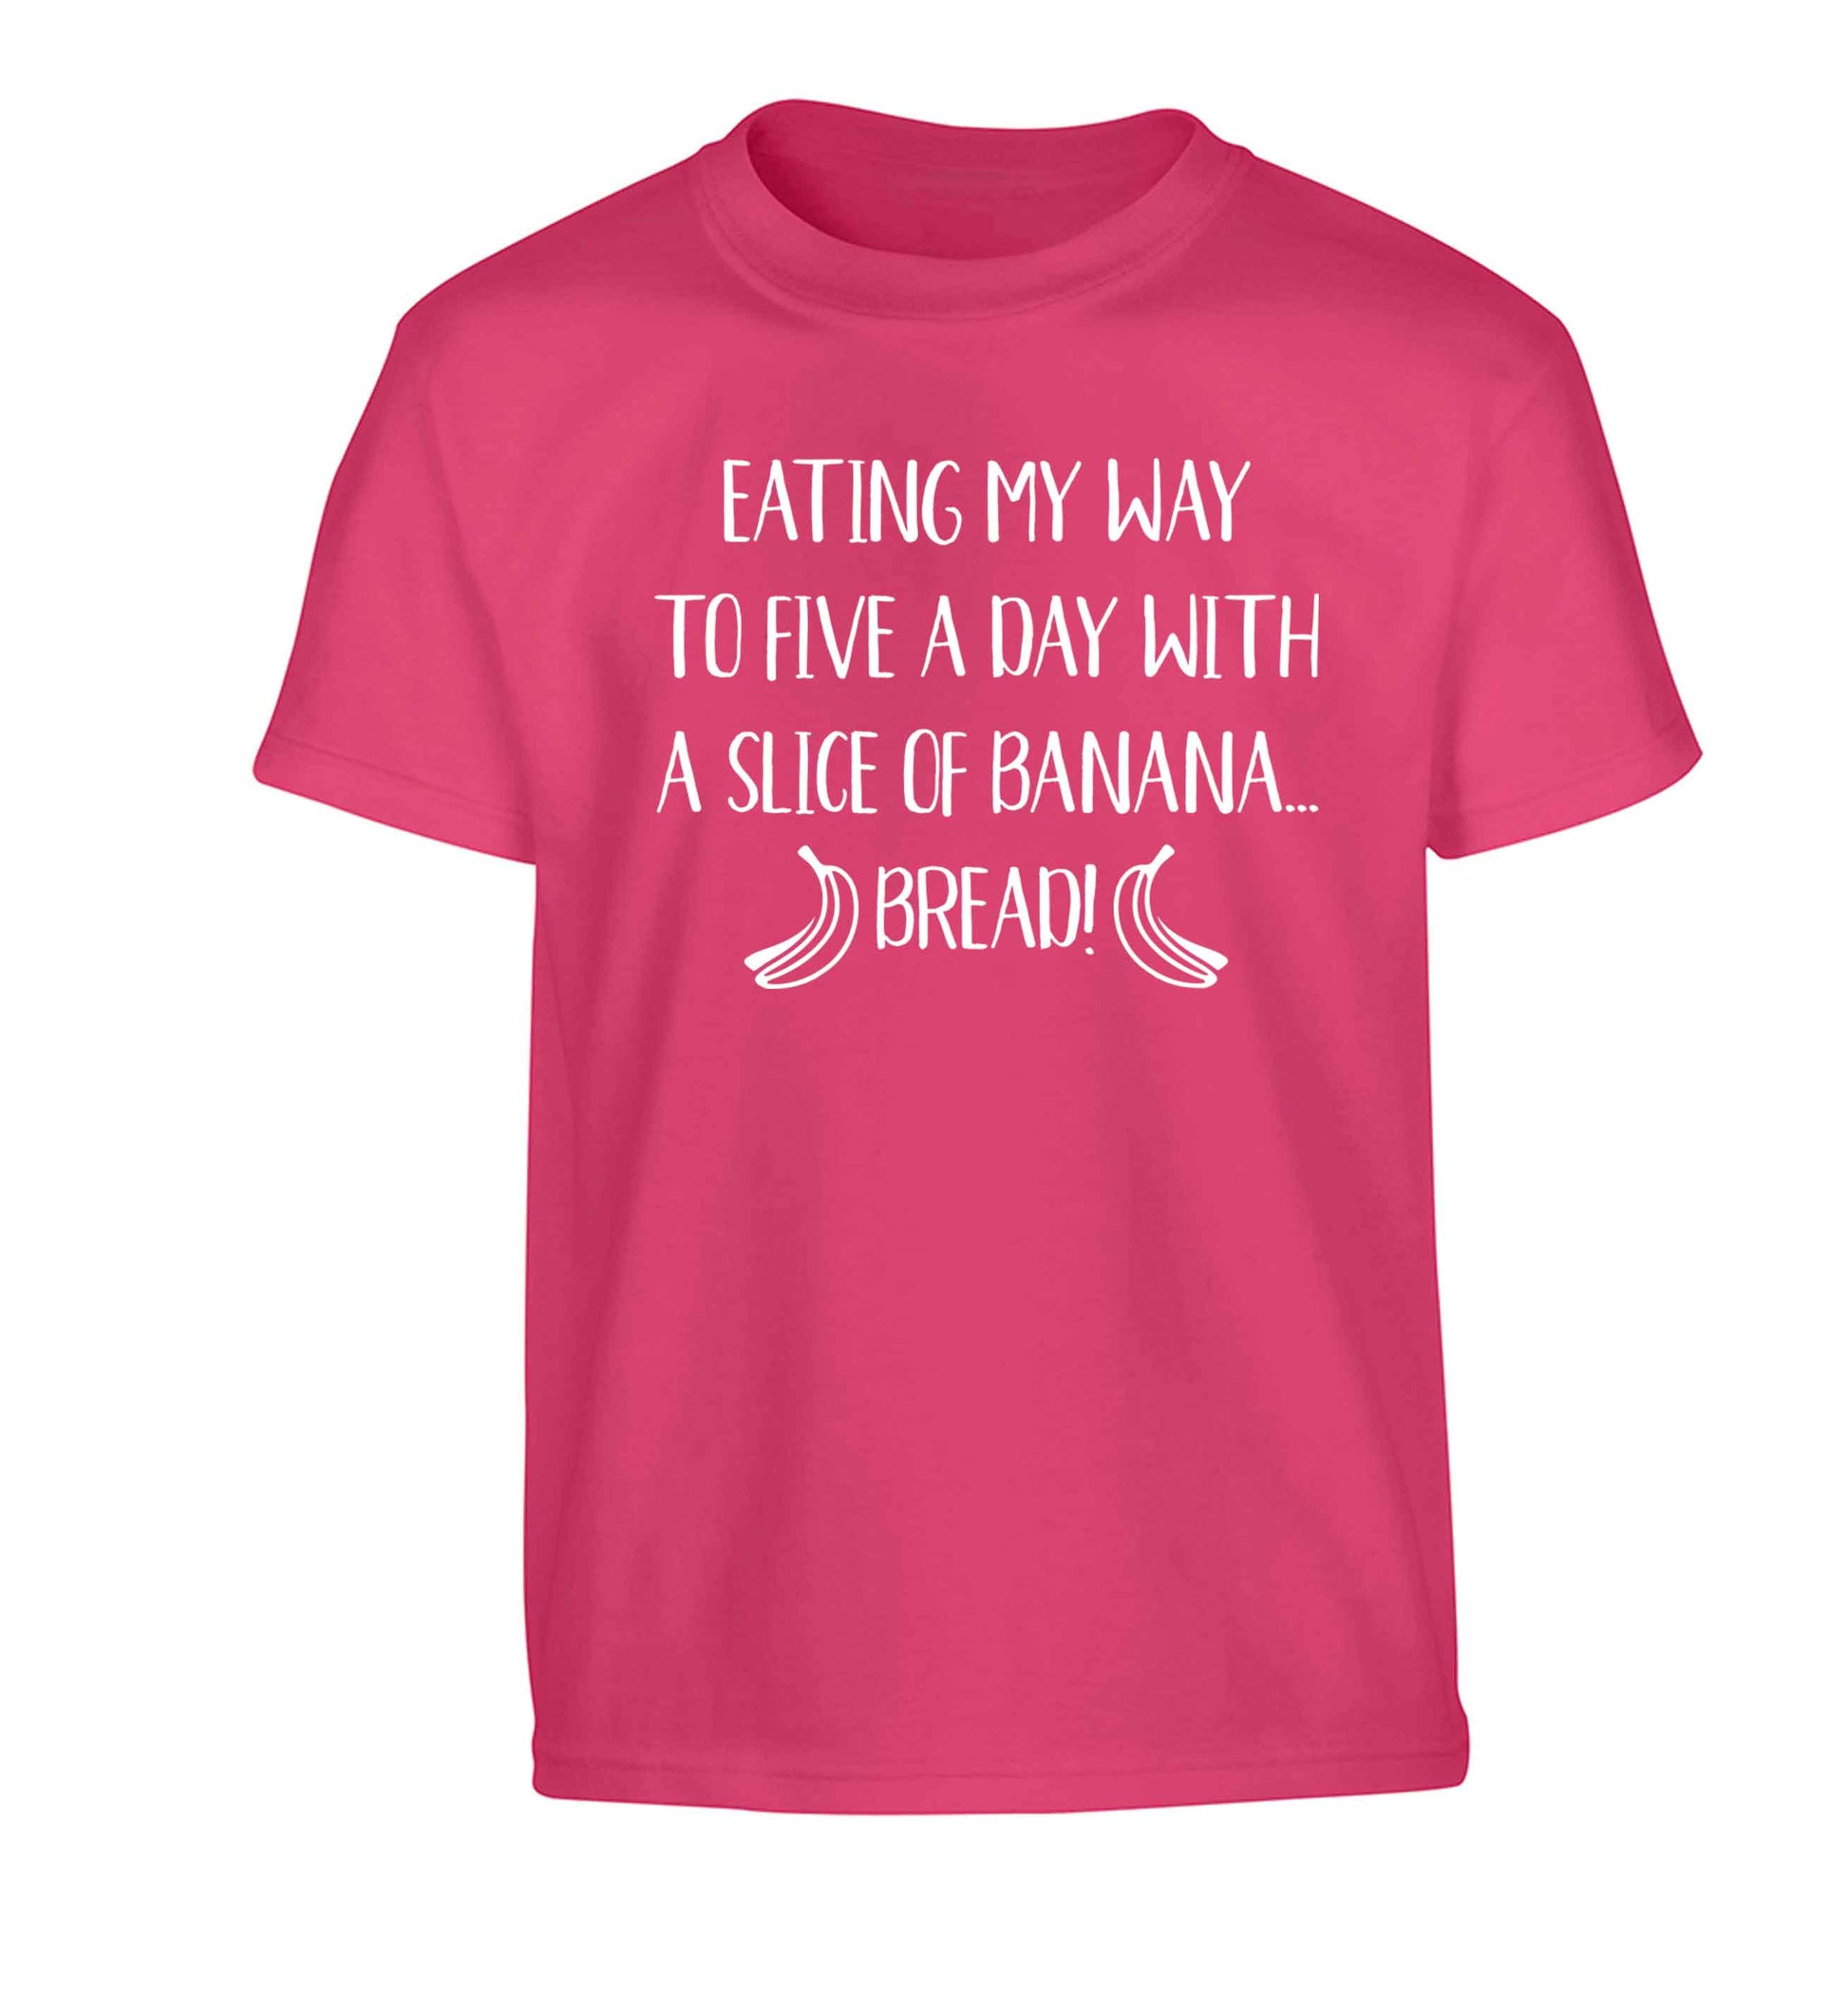 Eating my way to five a day with a slice of banana bread Children's pink Tshirt 12-13 Years